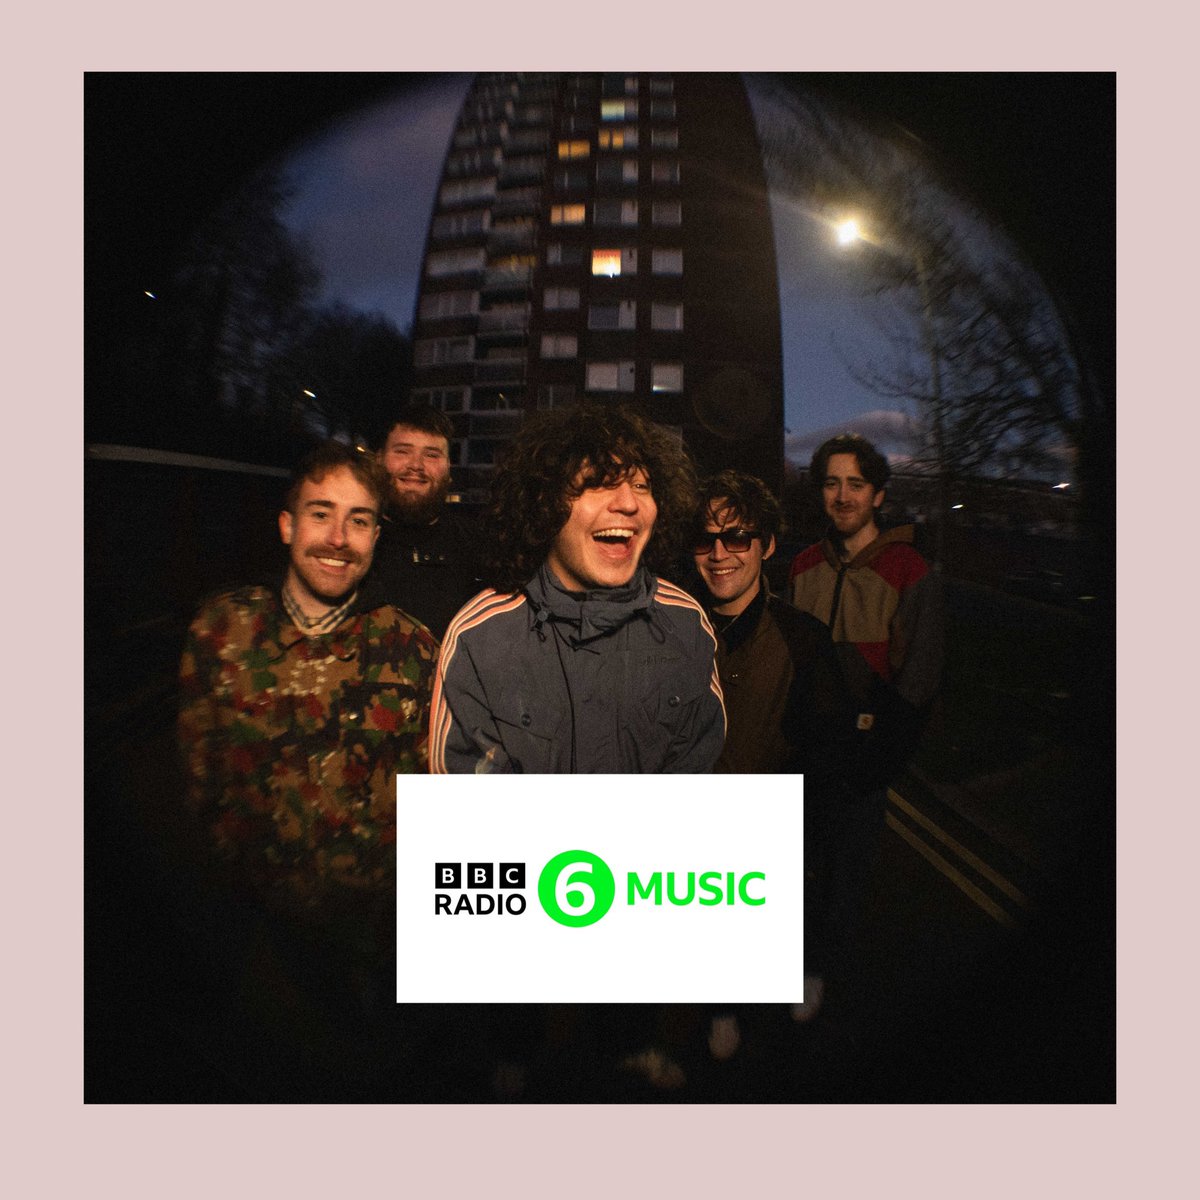 Lammo in the main room on the 1s & 2s via @BBC6Music - radio premiere for @Pastelbanduk with Dancing On A Pin 🌍📻 Get @steve_lamacq CRANKED UP LOUD